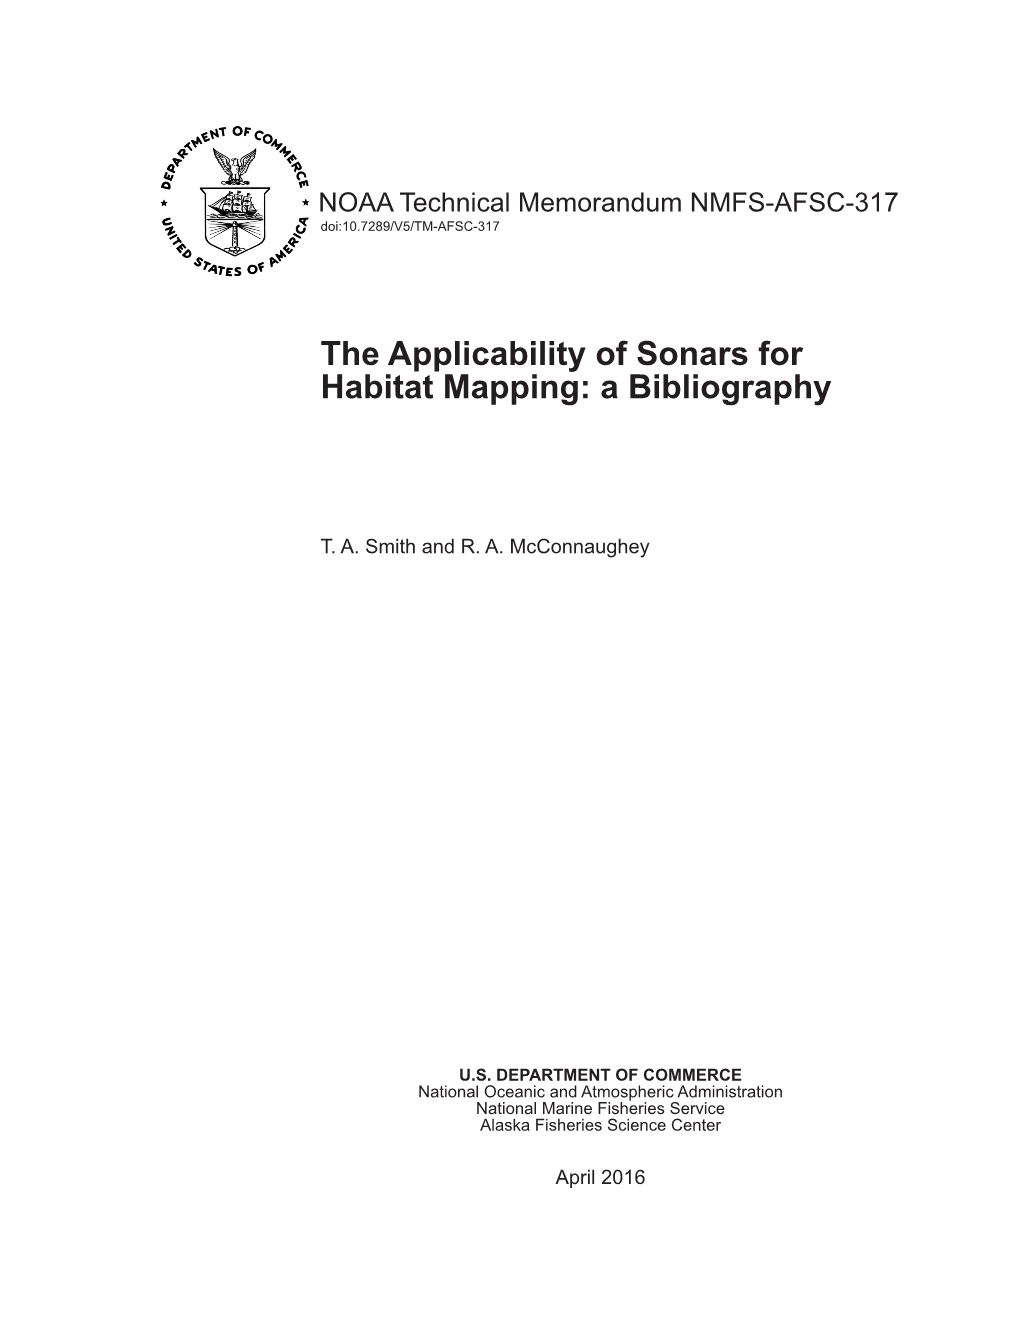 The Applicability of Sonars for Habitat Mapping: a Bibliography